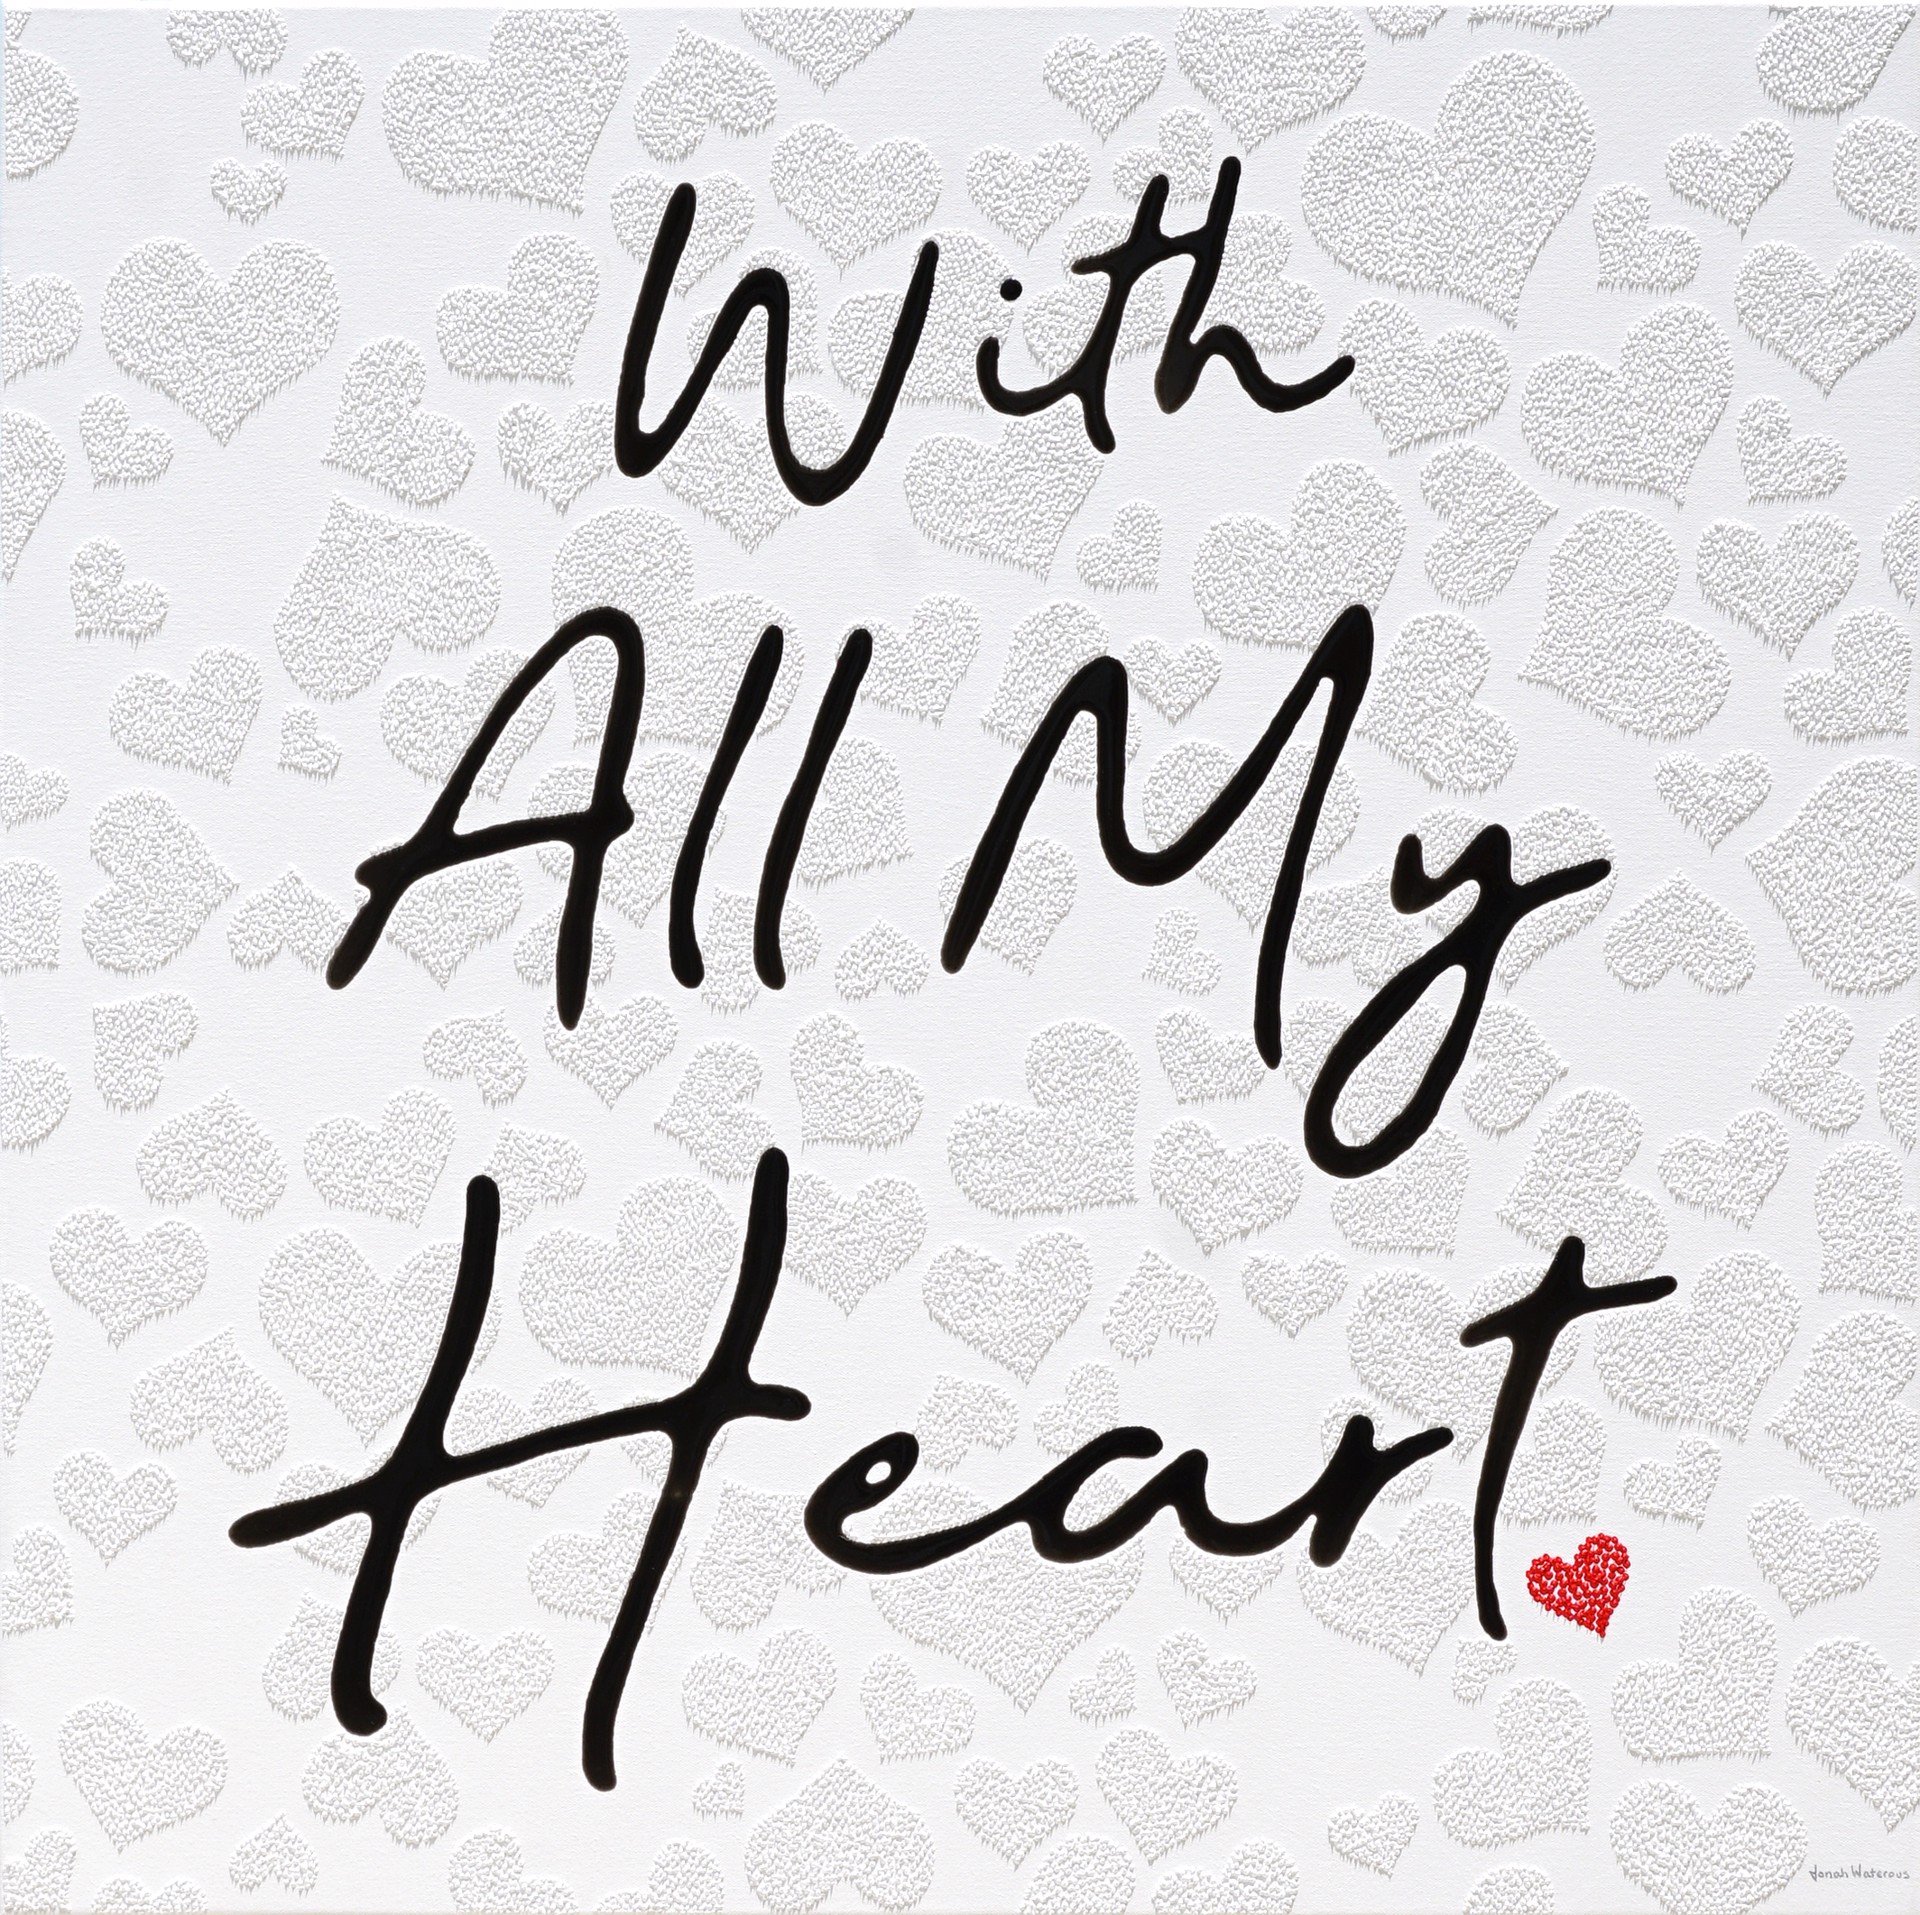 With all my heart  by Jonah Waterous